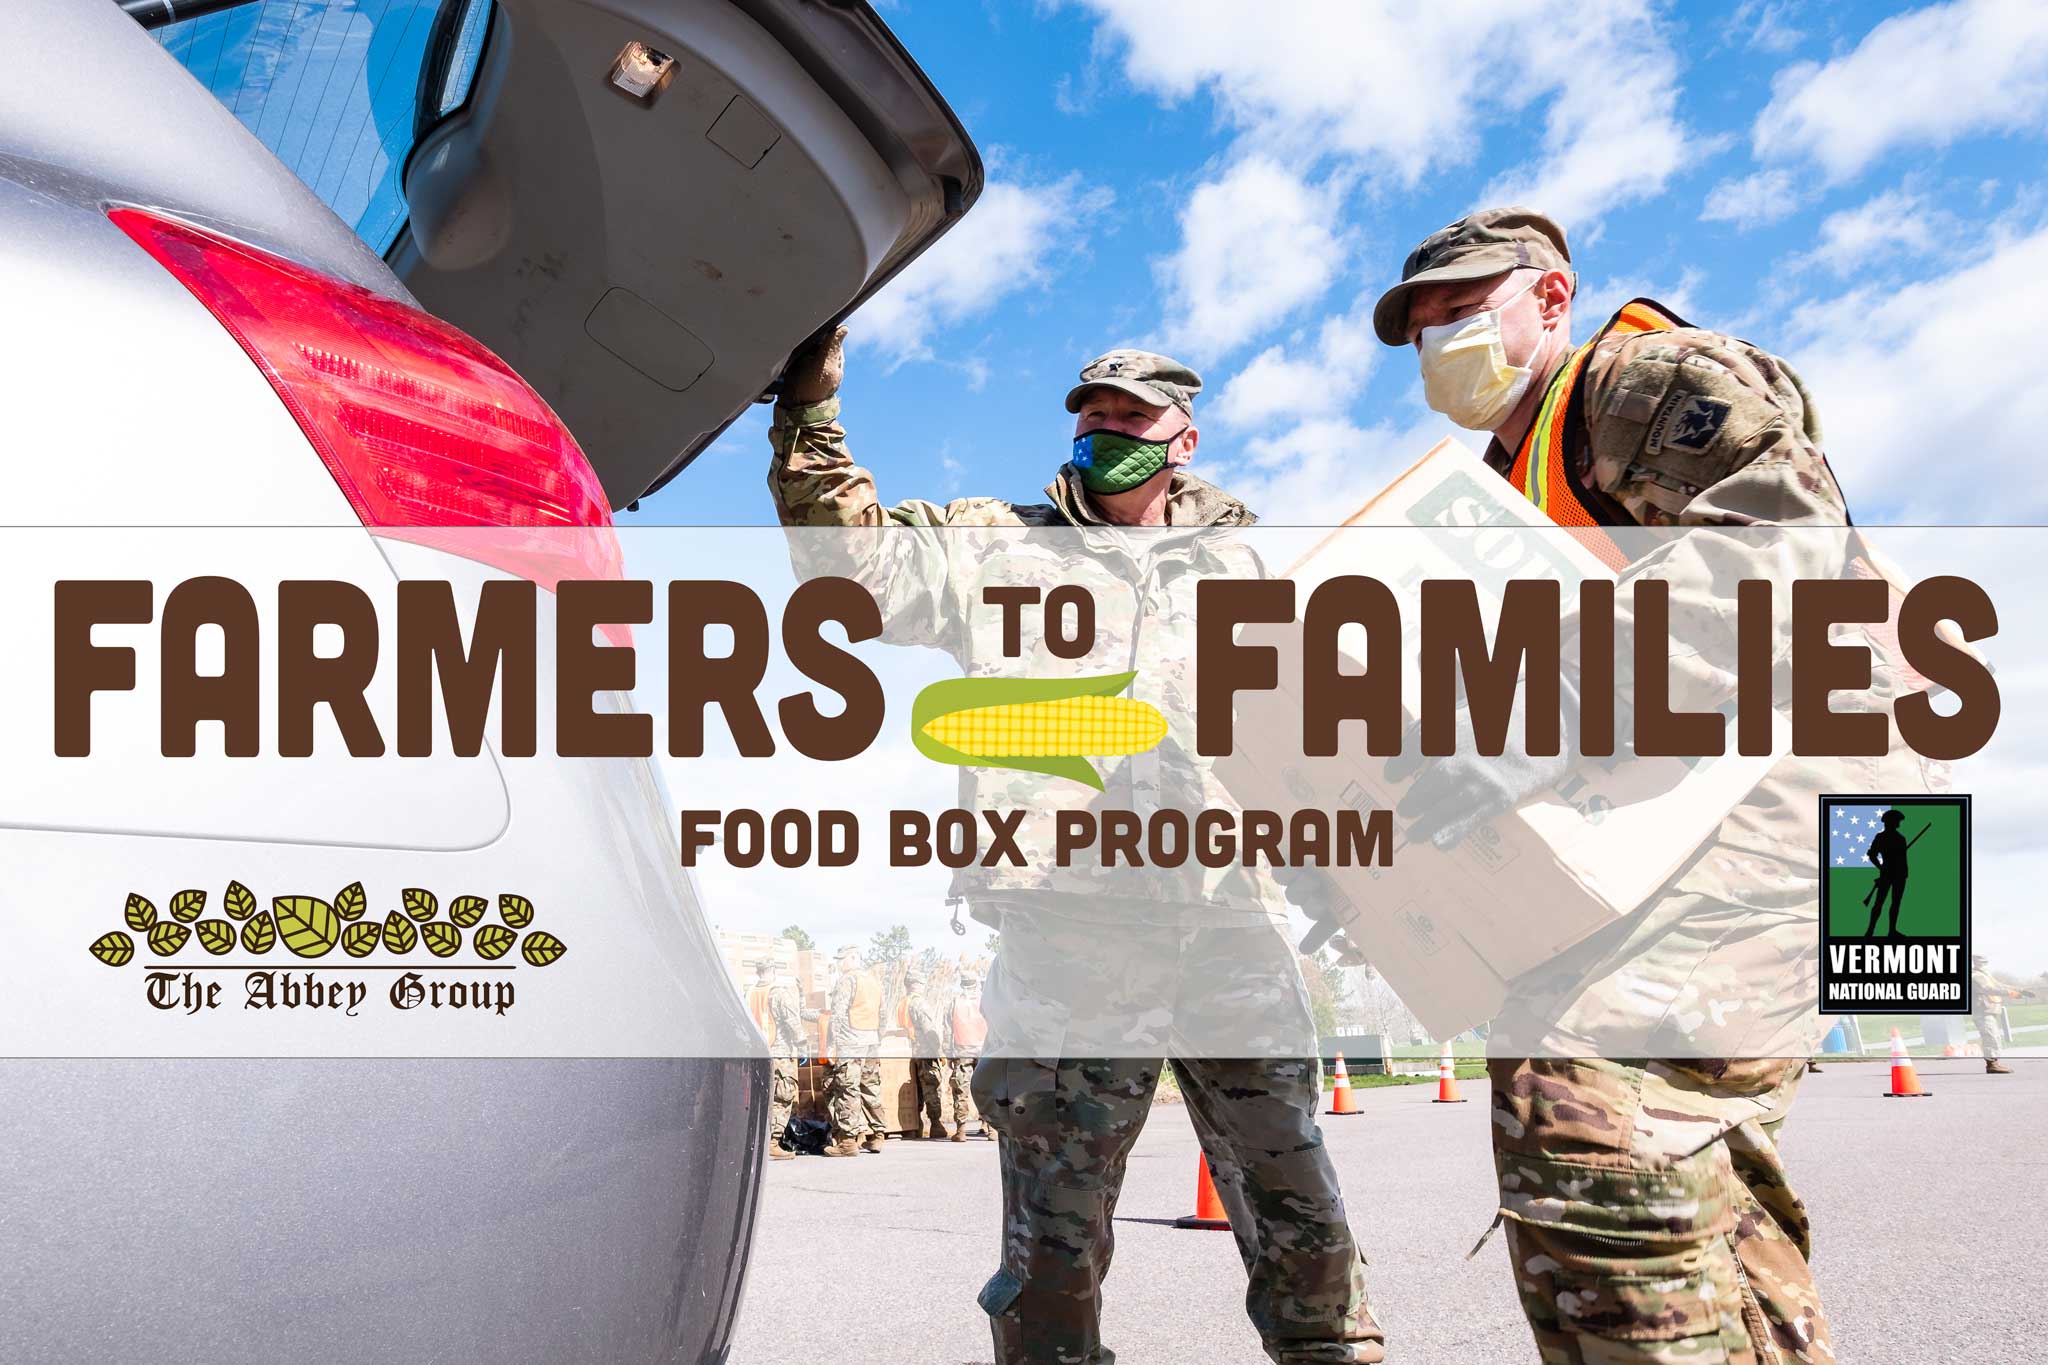 Photo of Vermont National Guard loading boxes of food into a car with Farmers To Families Food Box Program text overlayed.